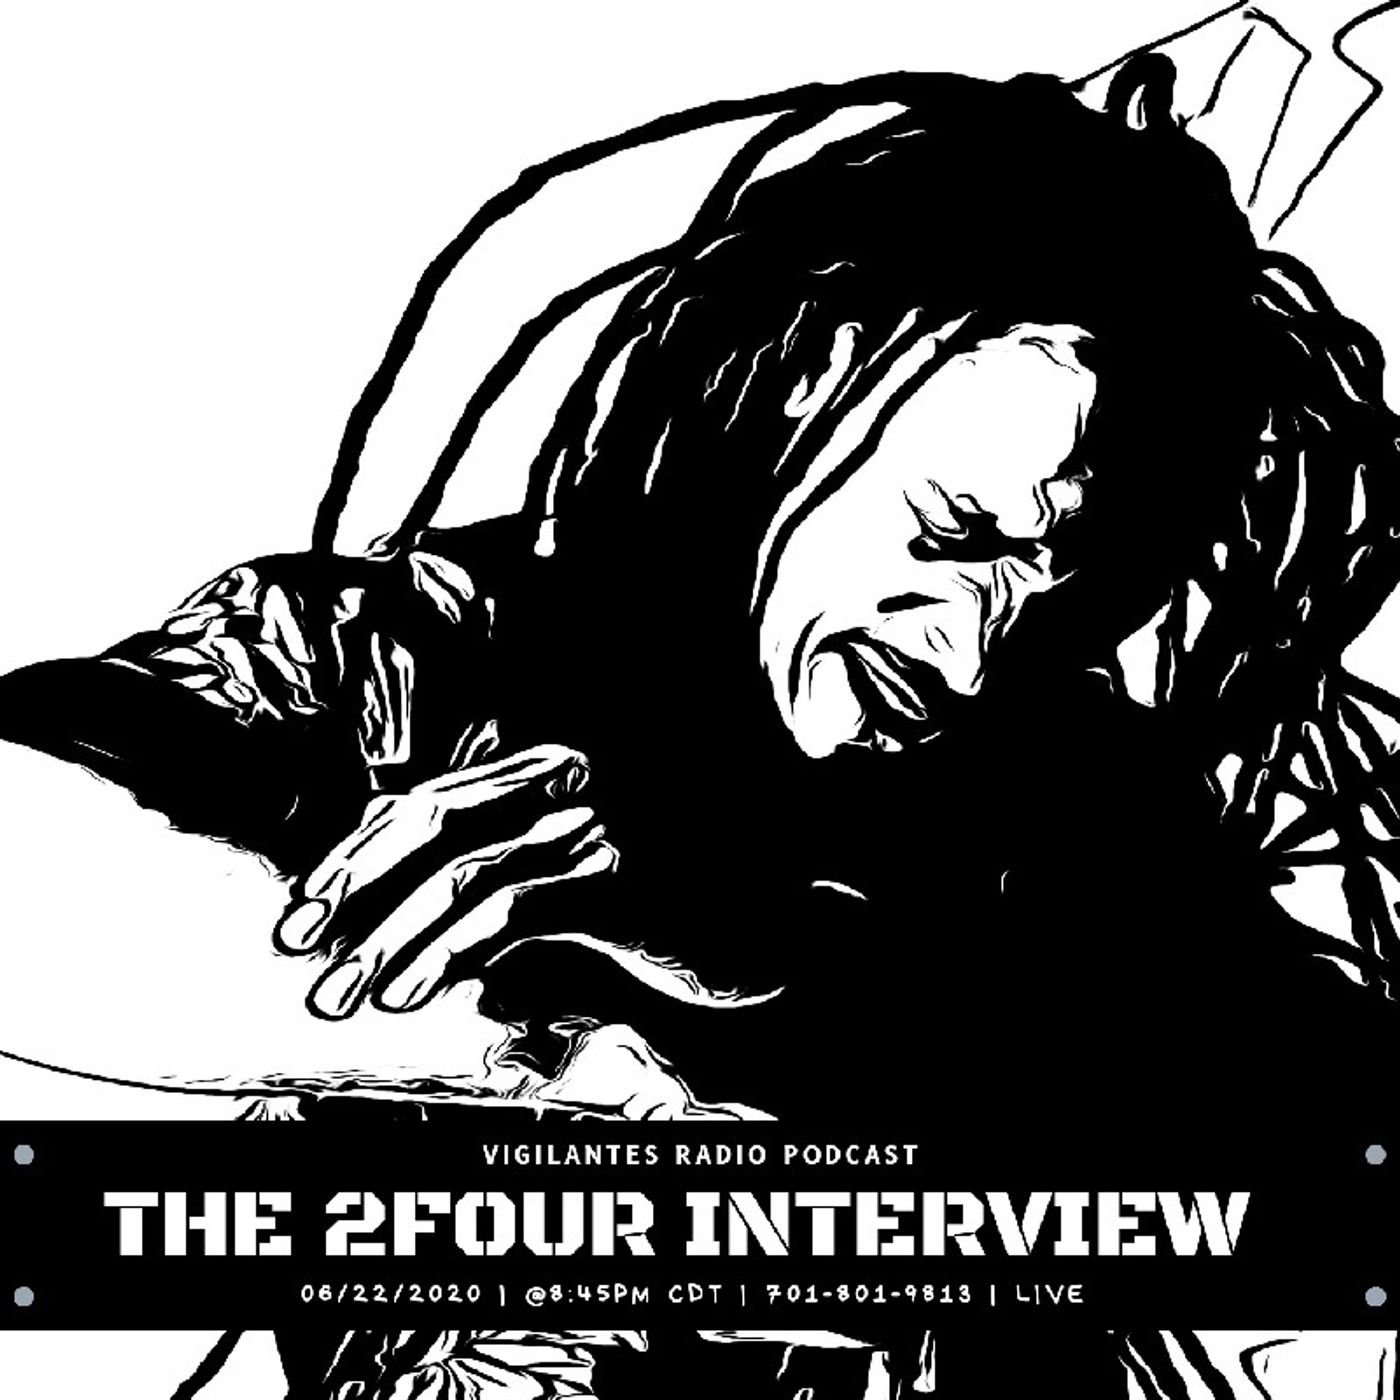 The 2FOUR Interview. Image